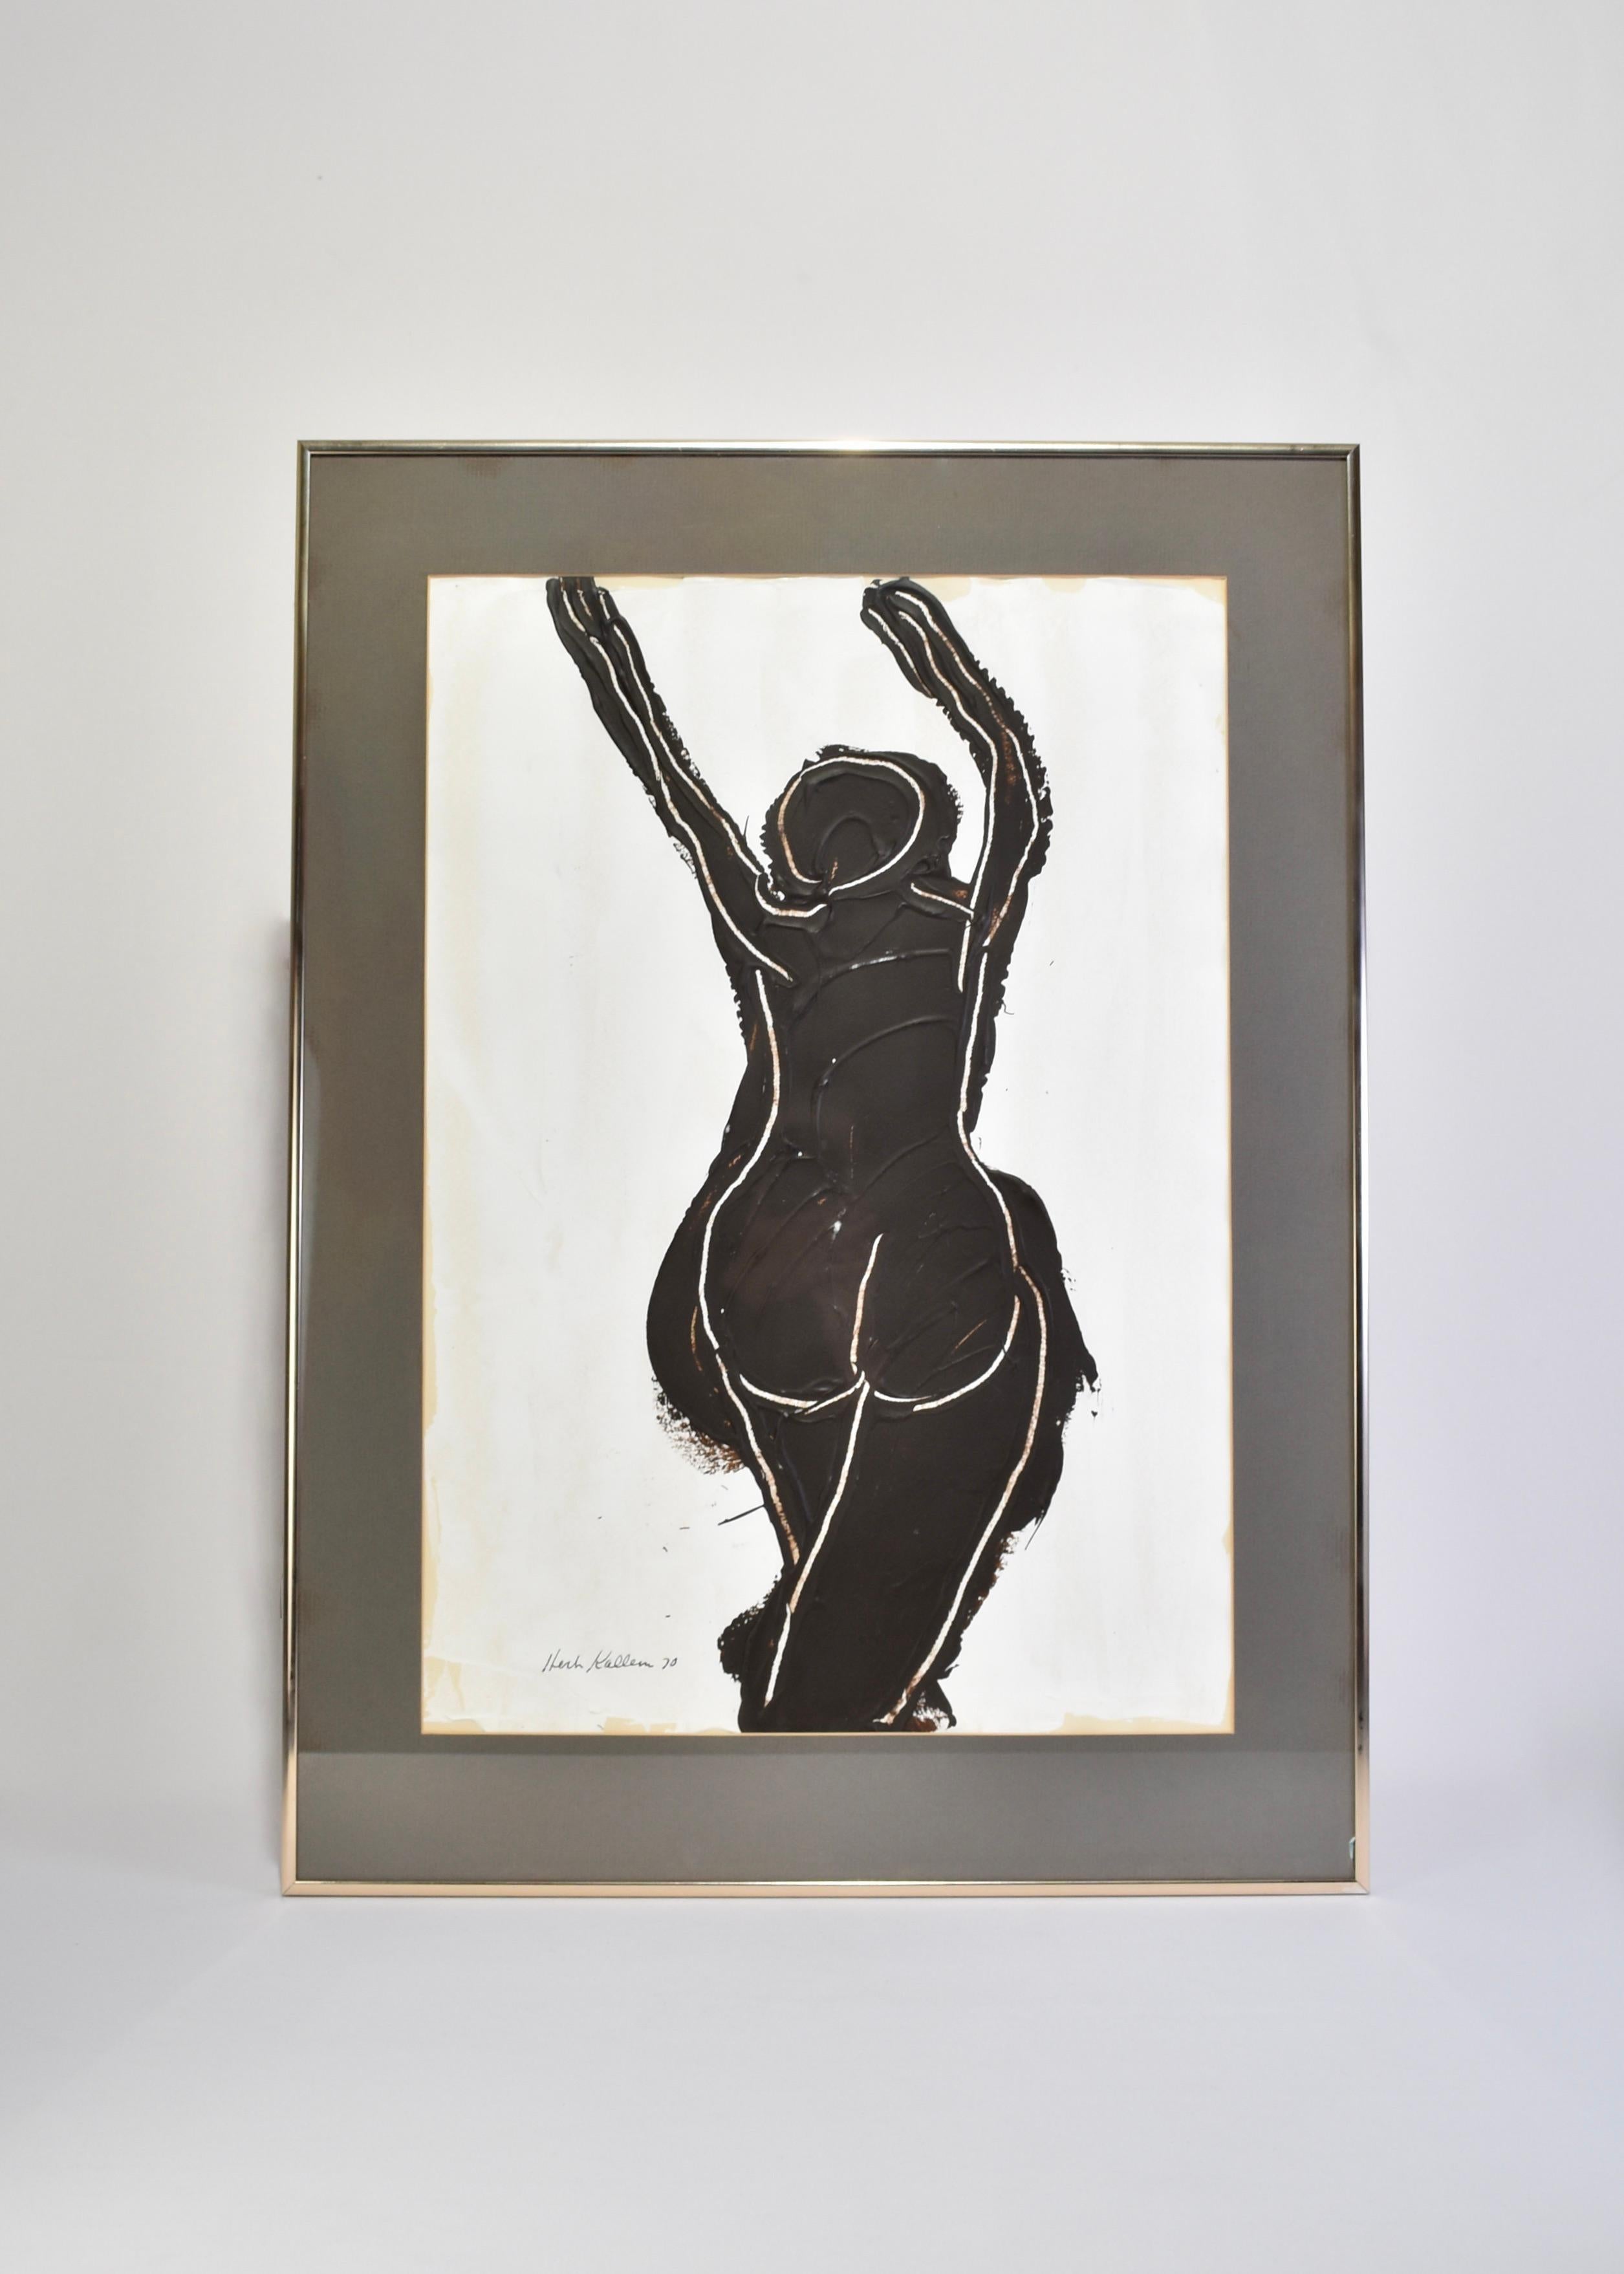 Vintage framed painting of a nude figure by renowned artist, Herbert Kallem (1909 - 1994). Signed Herbert Kallem, 70'.

Framed in original aluminum with grey matte and a wire on the back for hanging. Original framer's sticker on the back reads,